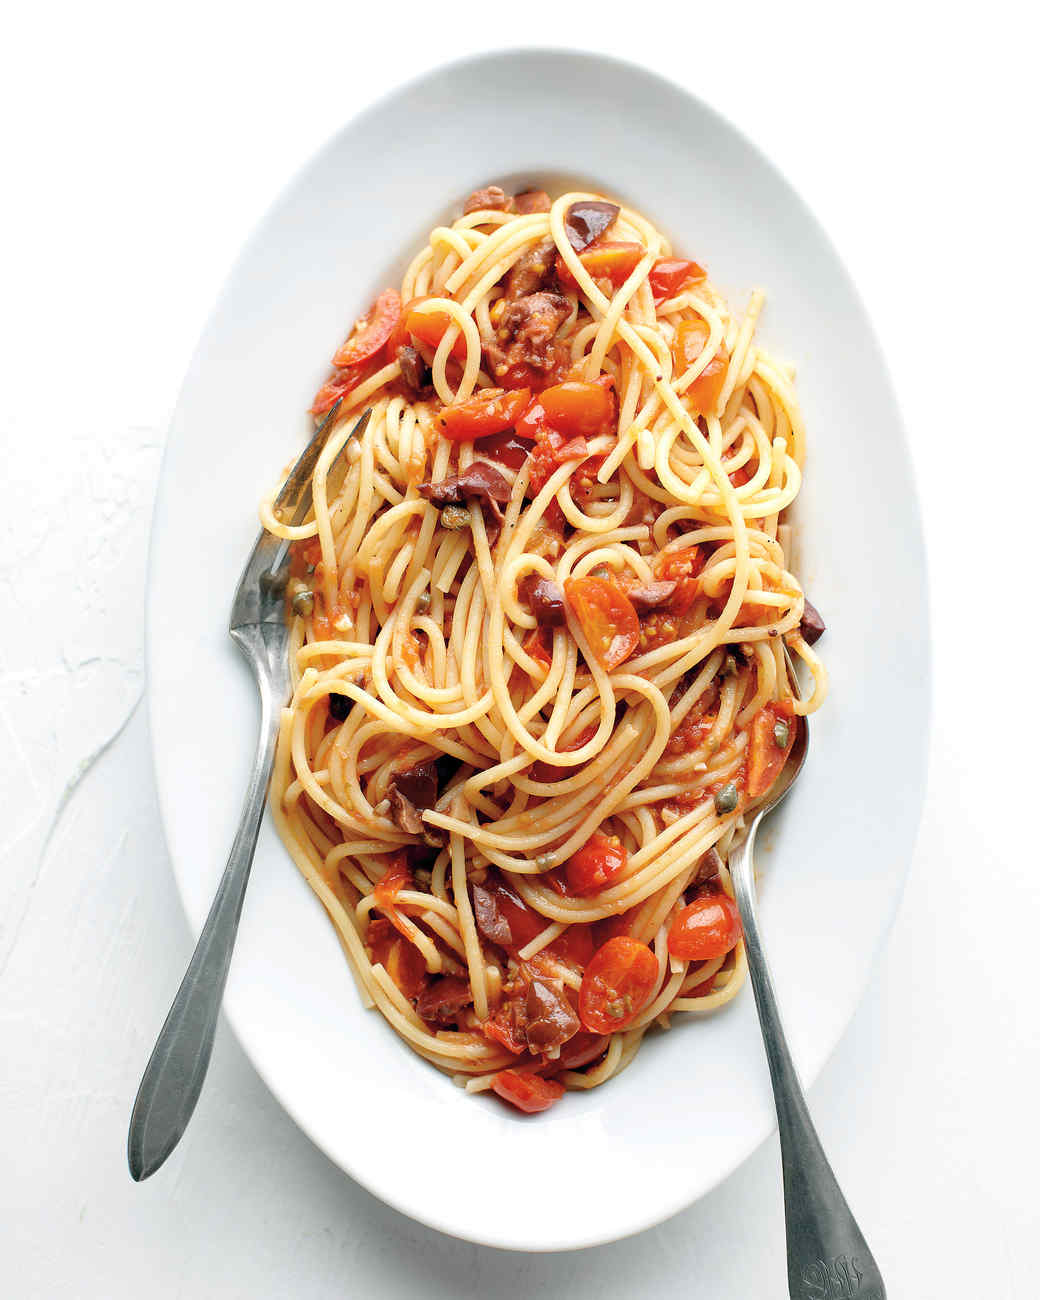 12 Classic Italian Pasta Recipes Everyone Should Know How to Make